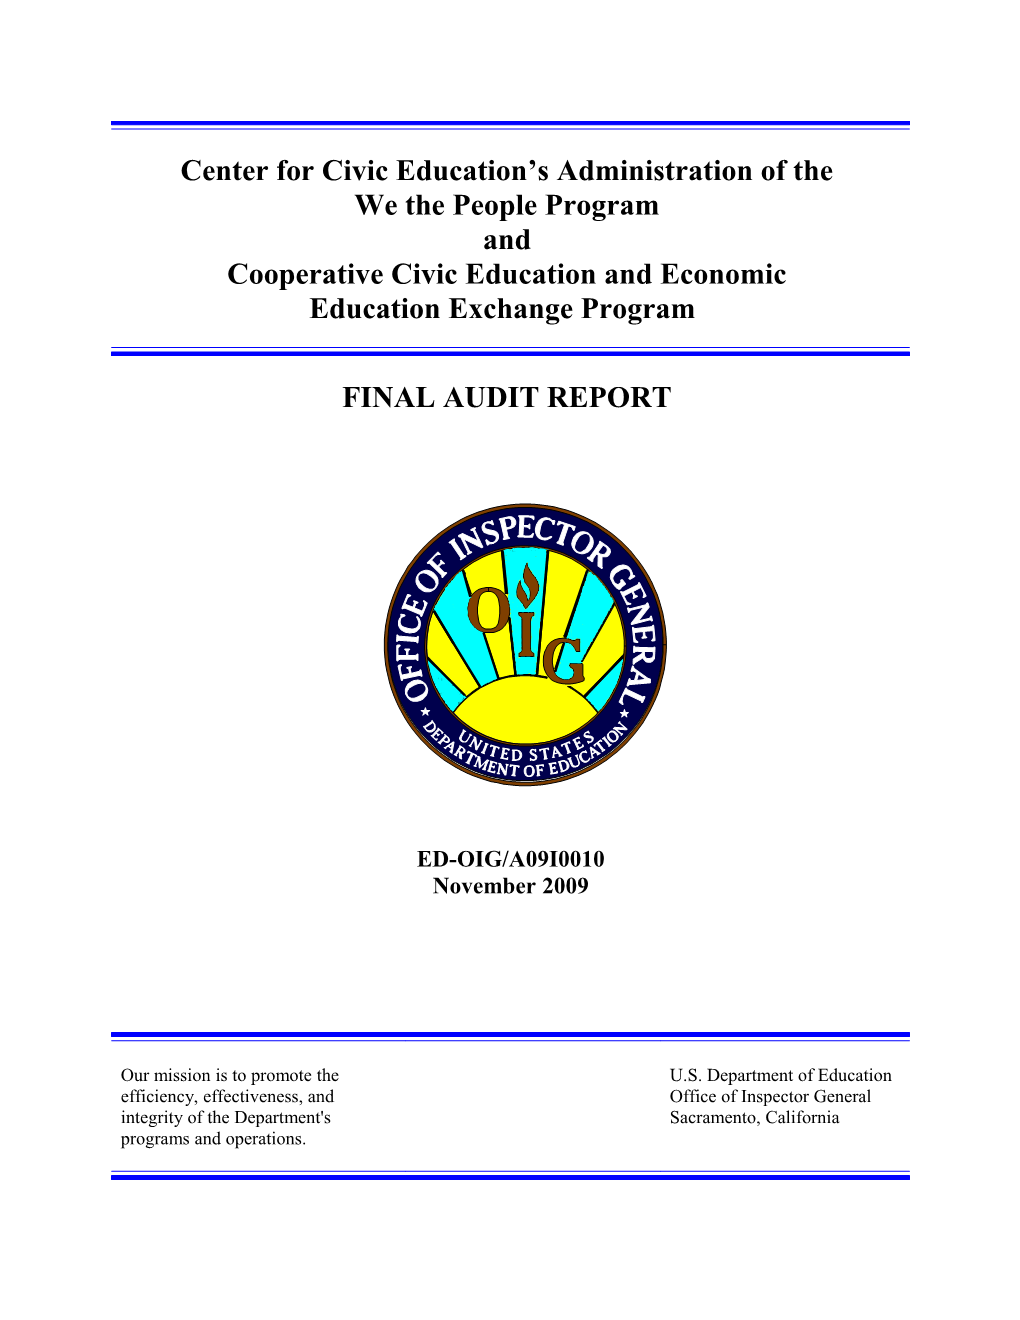 Audit A09I0010 - Center for Civic Education S Administration of the We the People Program